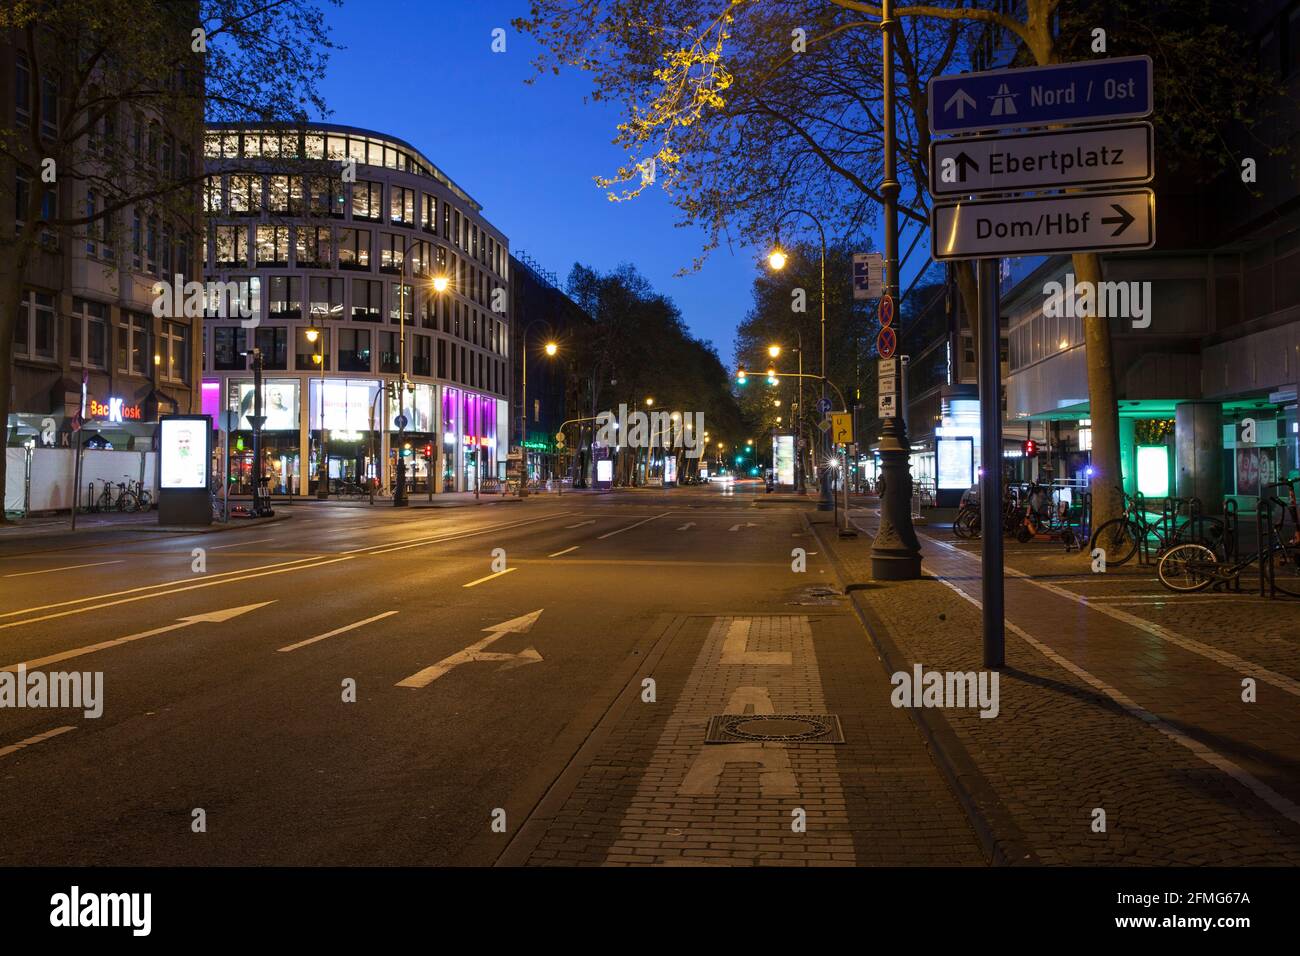 curfew from 9 pm during corona pandemic lockdown on May 5th. 2021. The deserted street Hohenzollernring at the Friesenplatz square, Cologne, Germany. Stock Photo